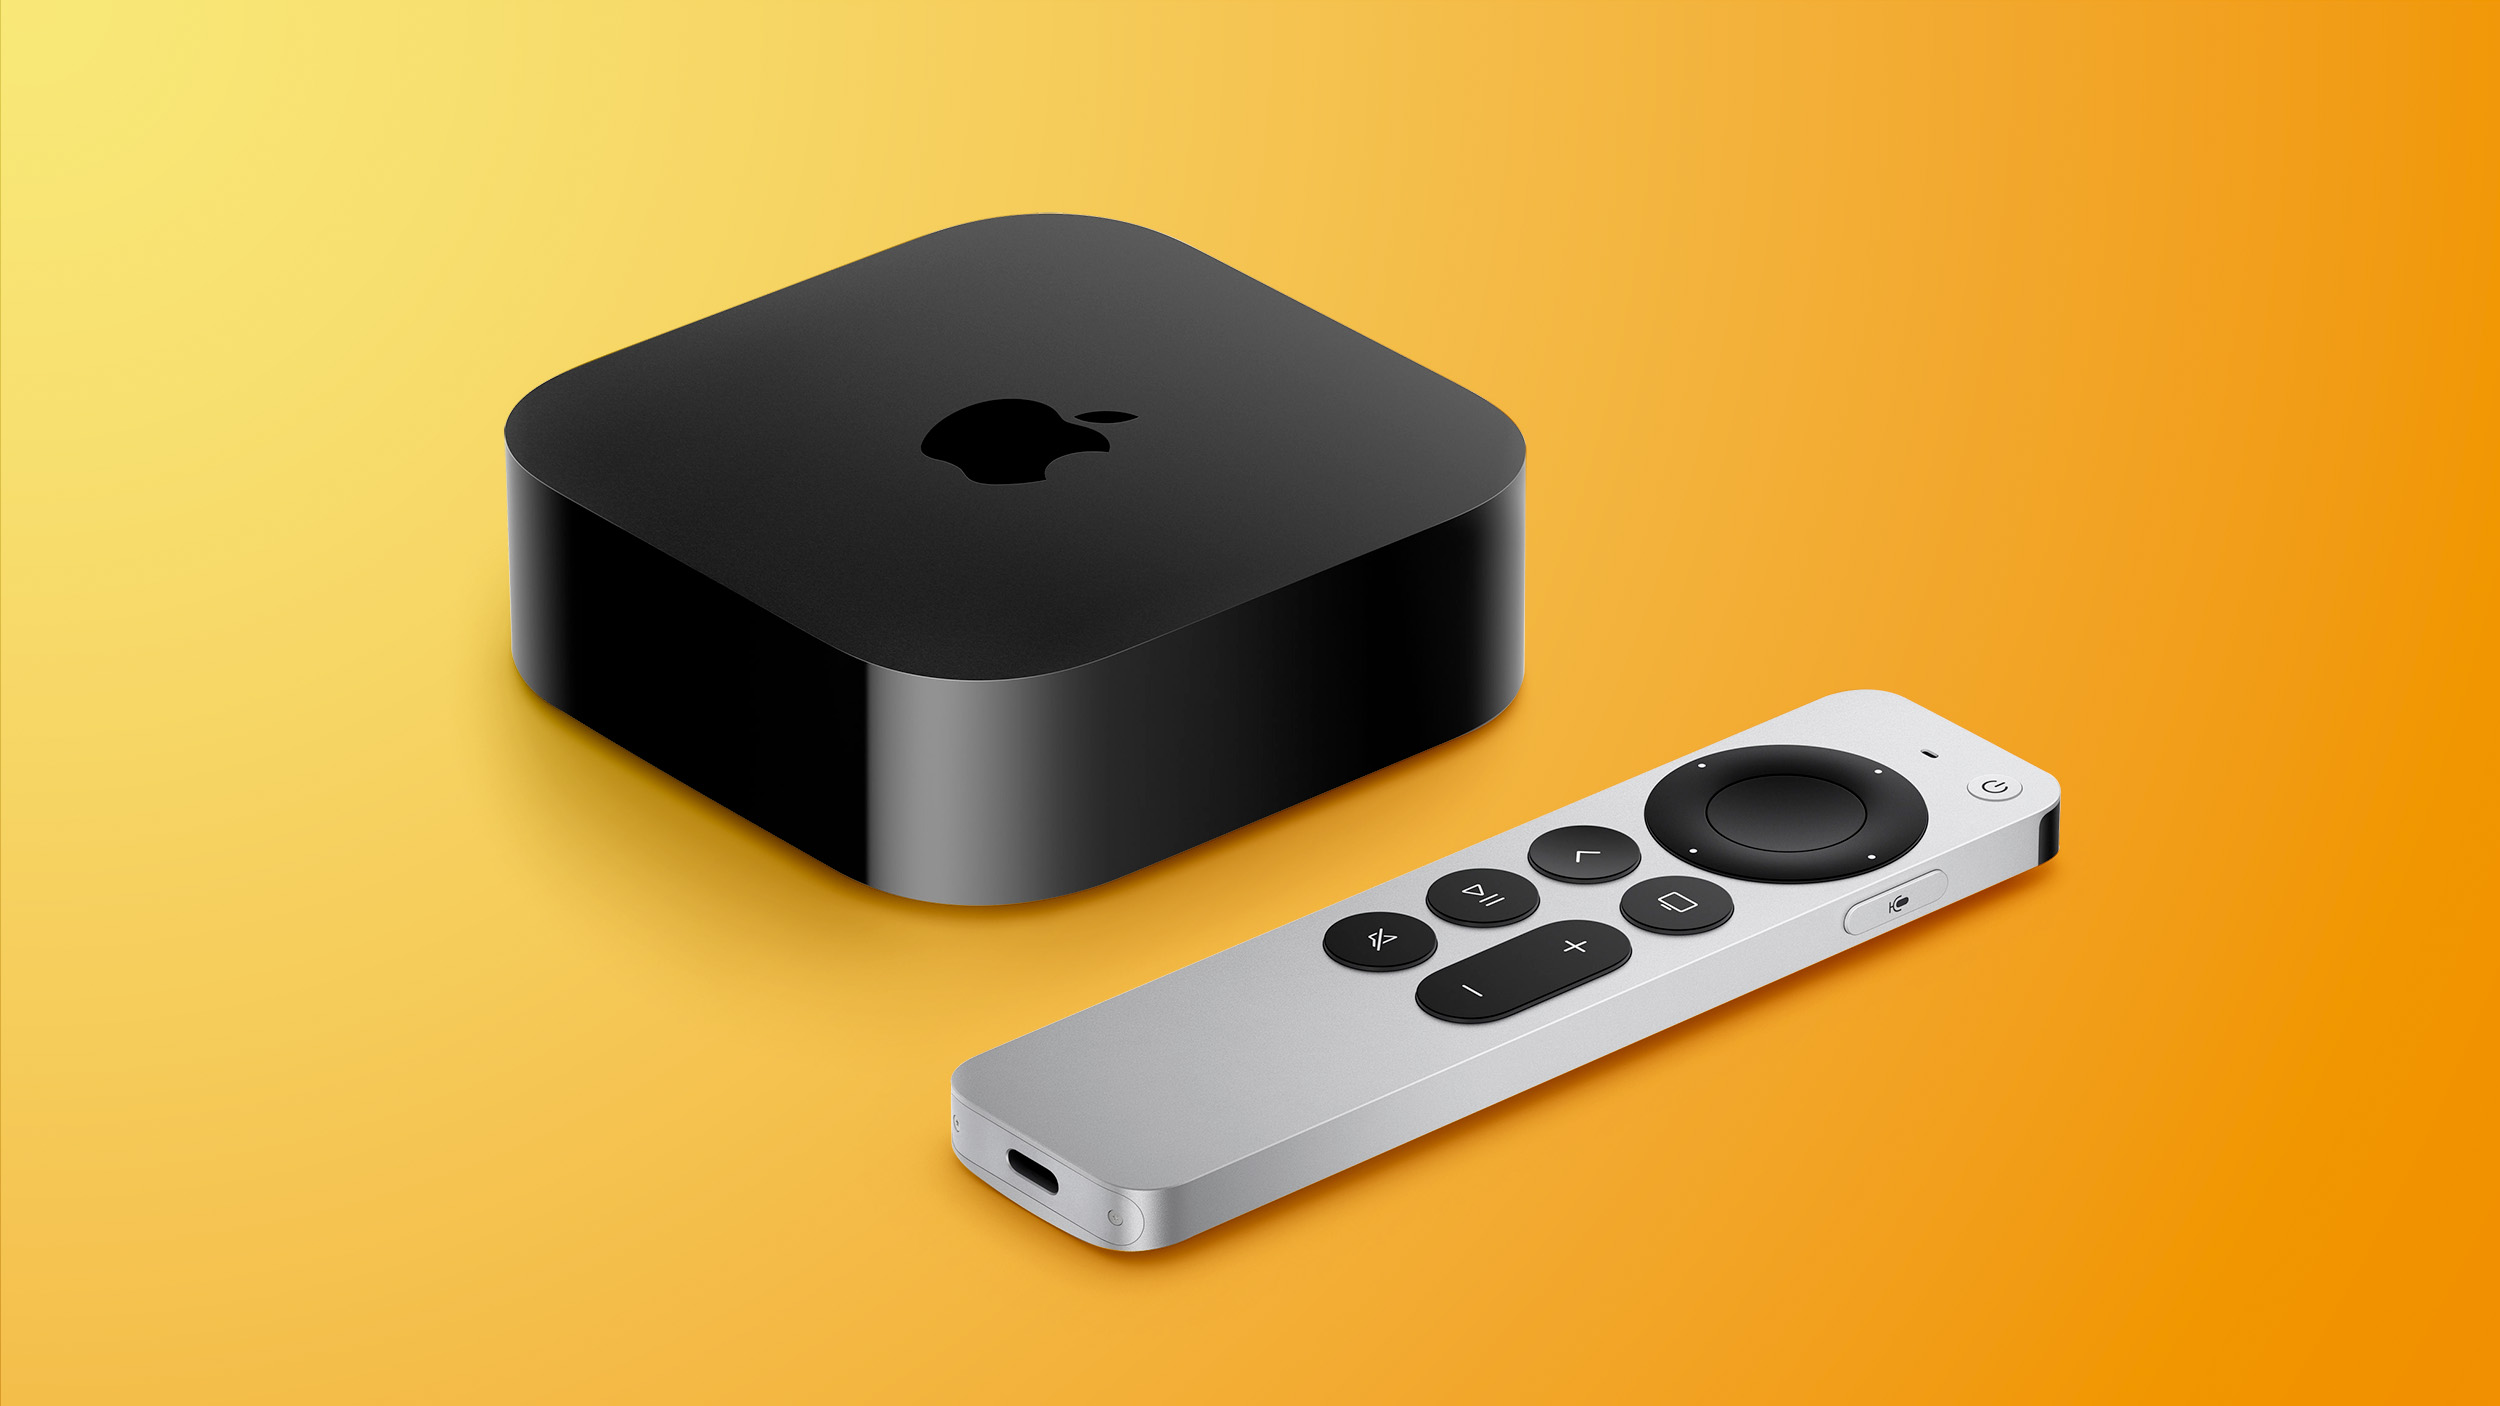 Autonom Bloom licens Apple TV: Just Updated with A15 Chip and Cheaper Price